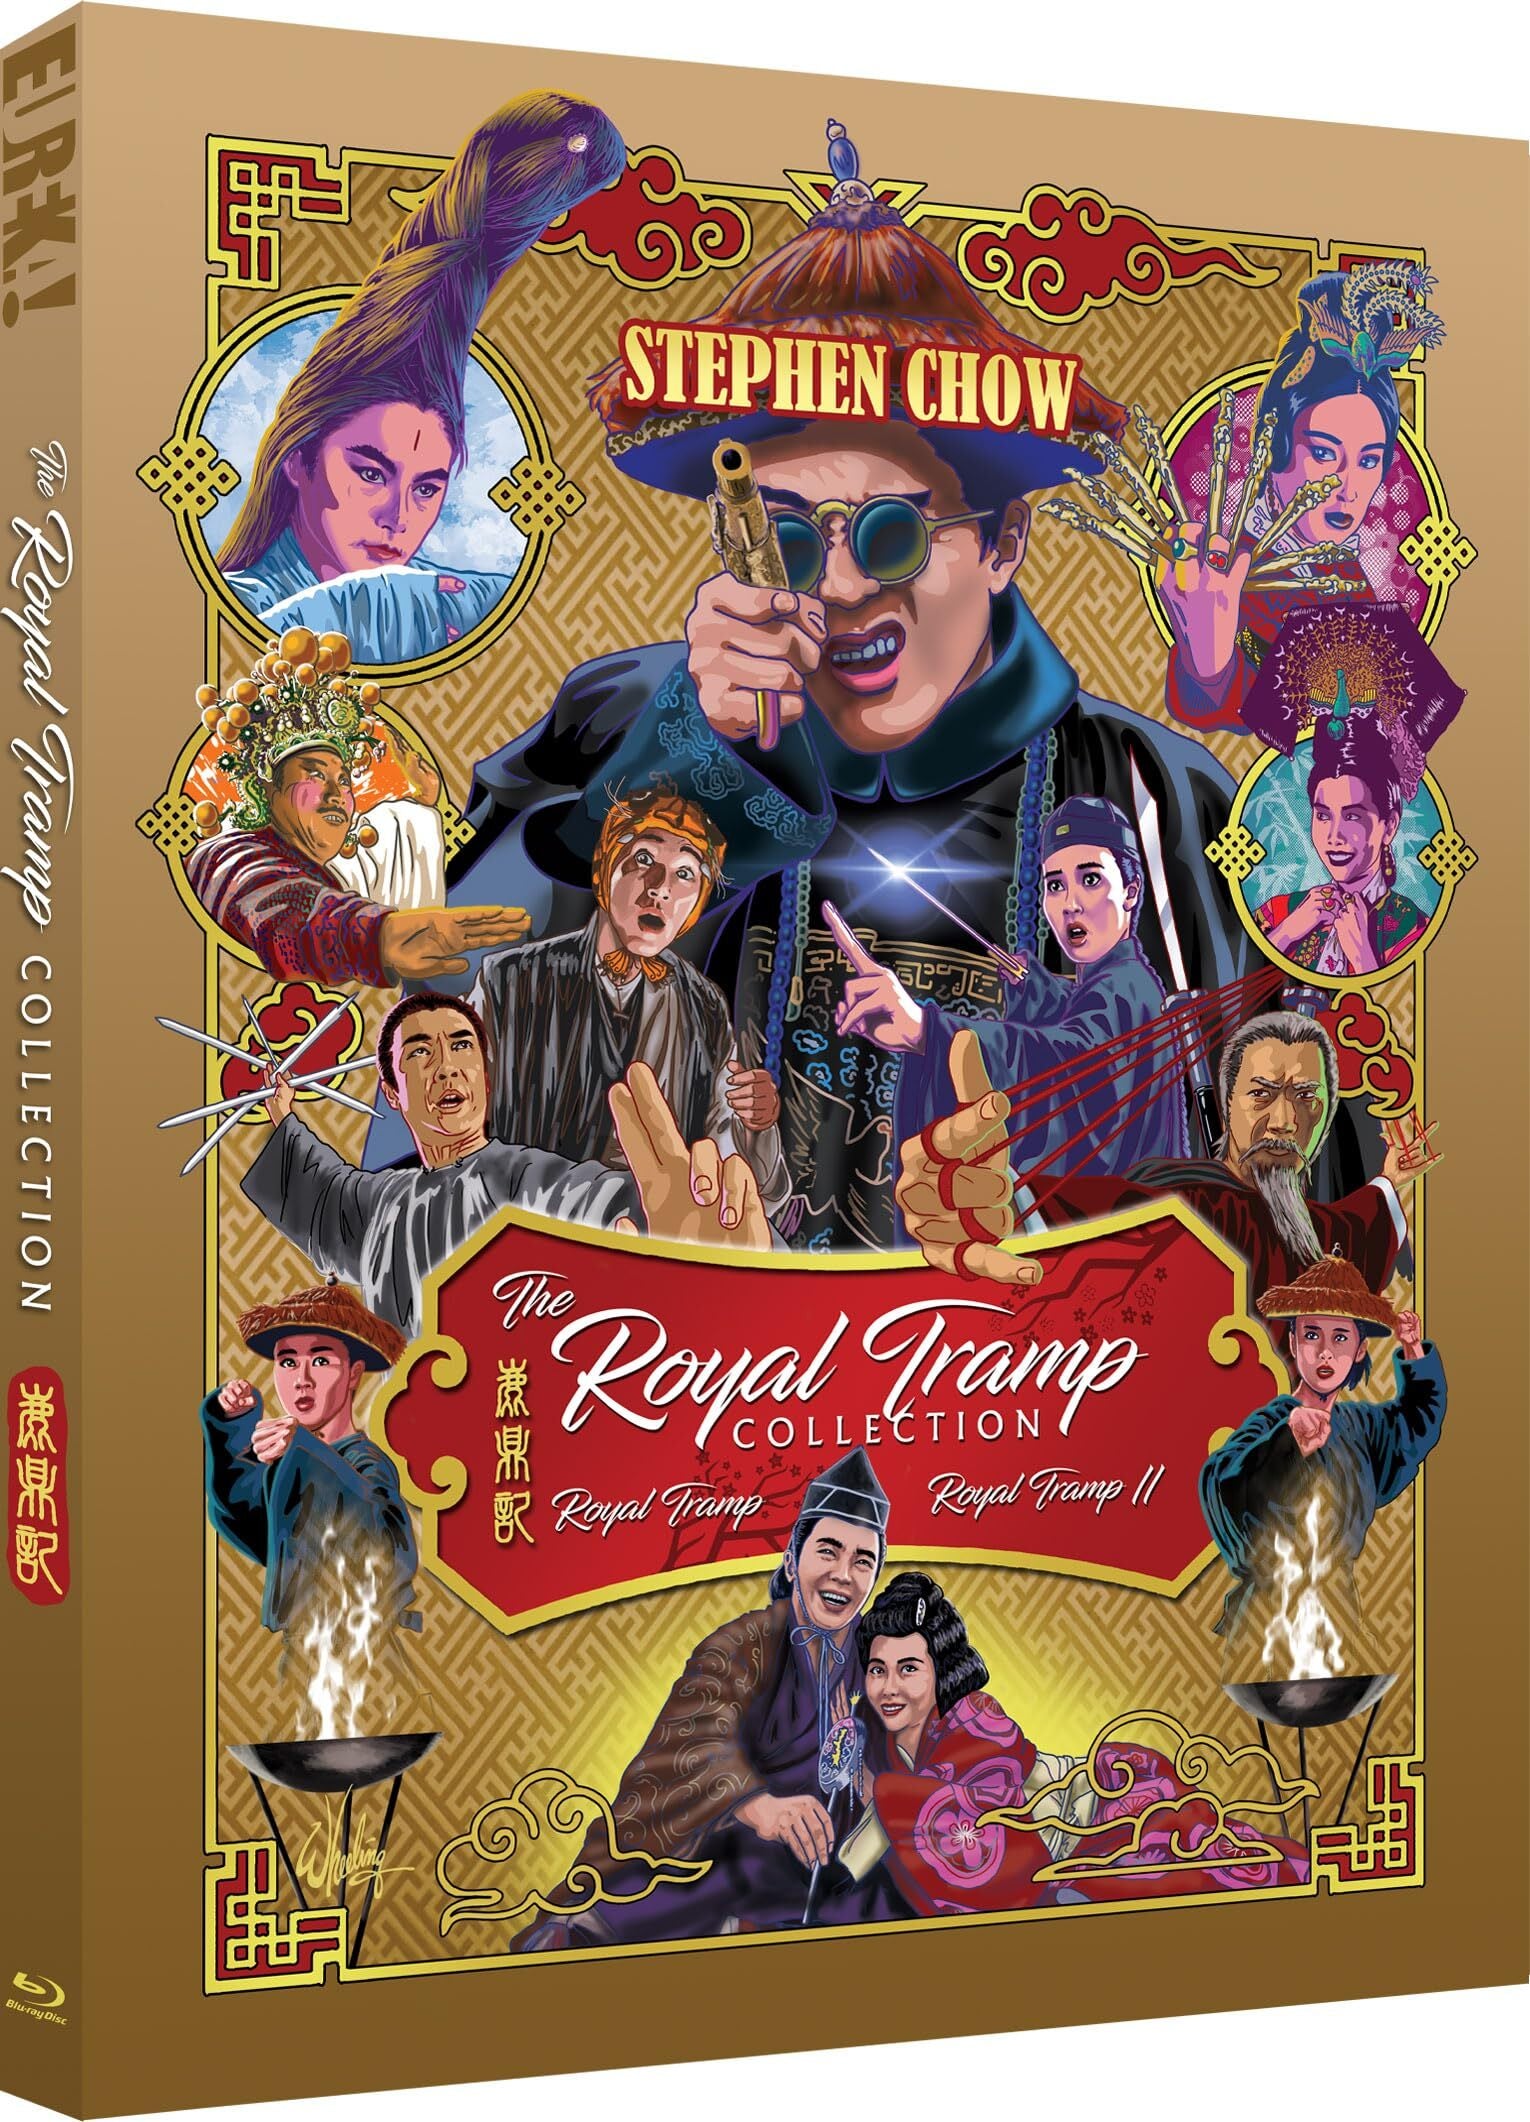 THE ROYAL TRAMP COLLECTION (REGION B IMPORT - LIMITED EDITION) BLU-RAY